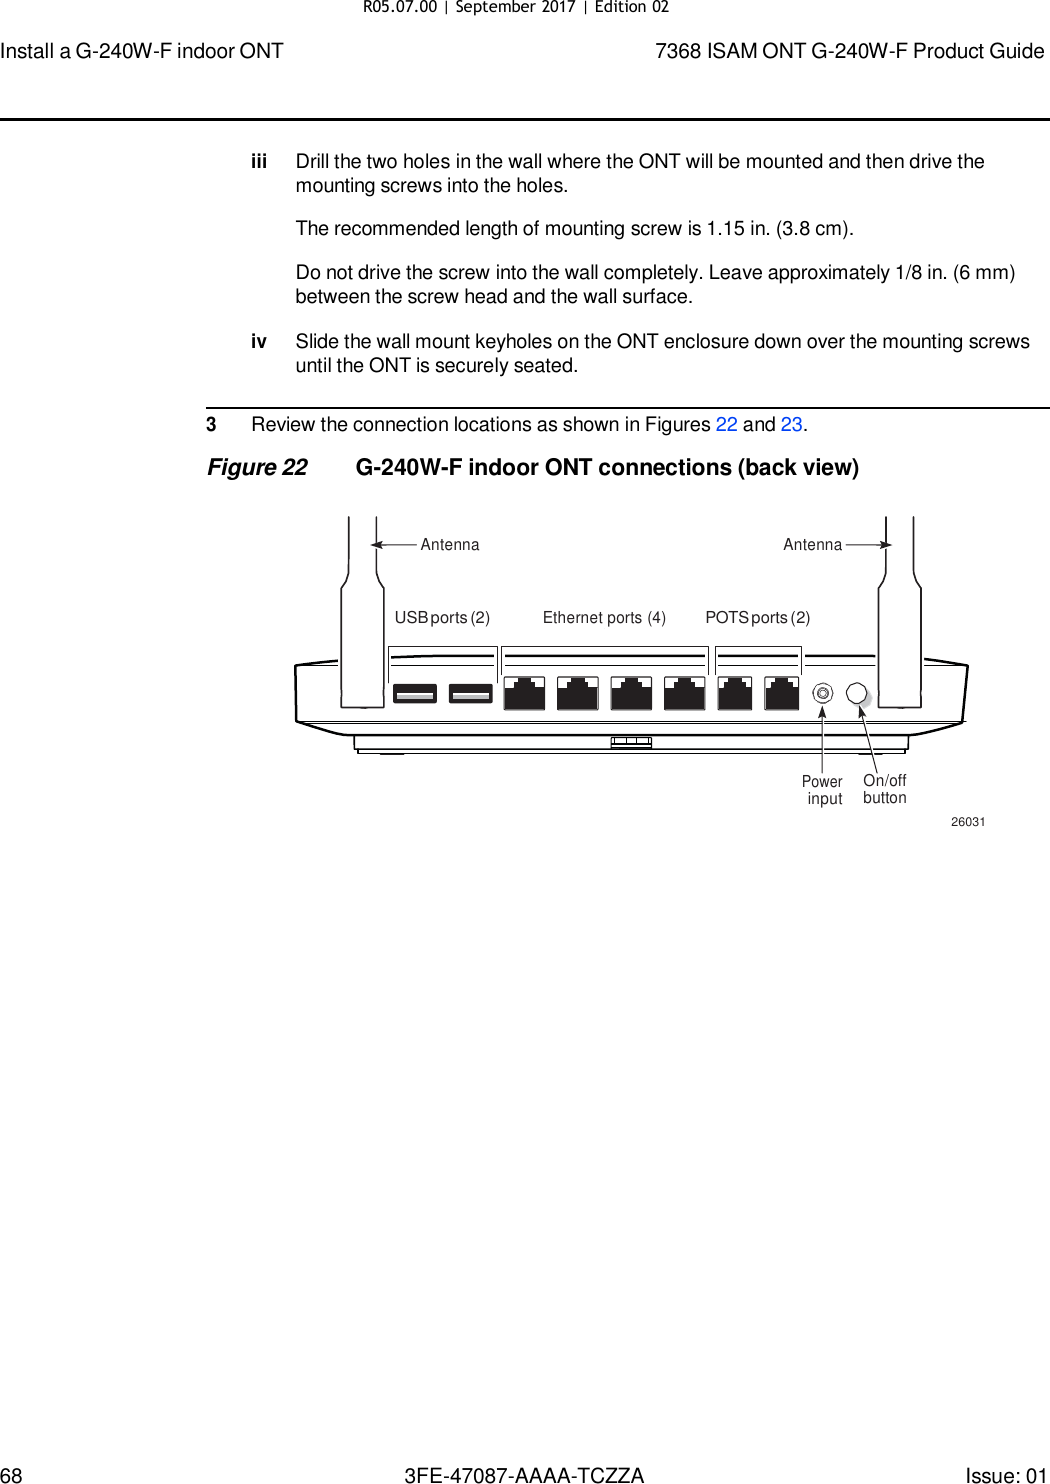 Page 64 of Nokia Bell G240WFV2 7368 ISAM GPON ONU User Manual 7368 ISAM ONT G 240W F Product Guide